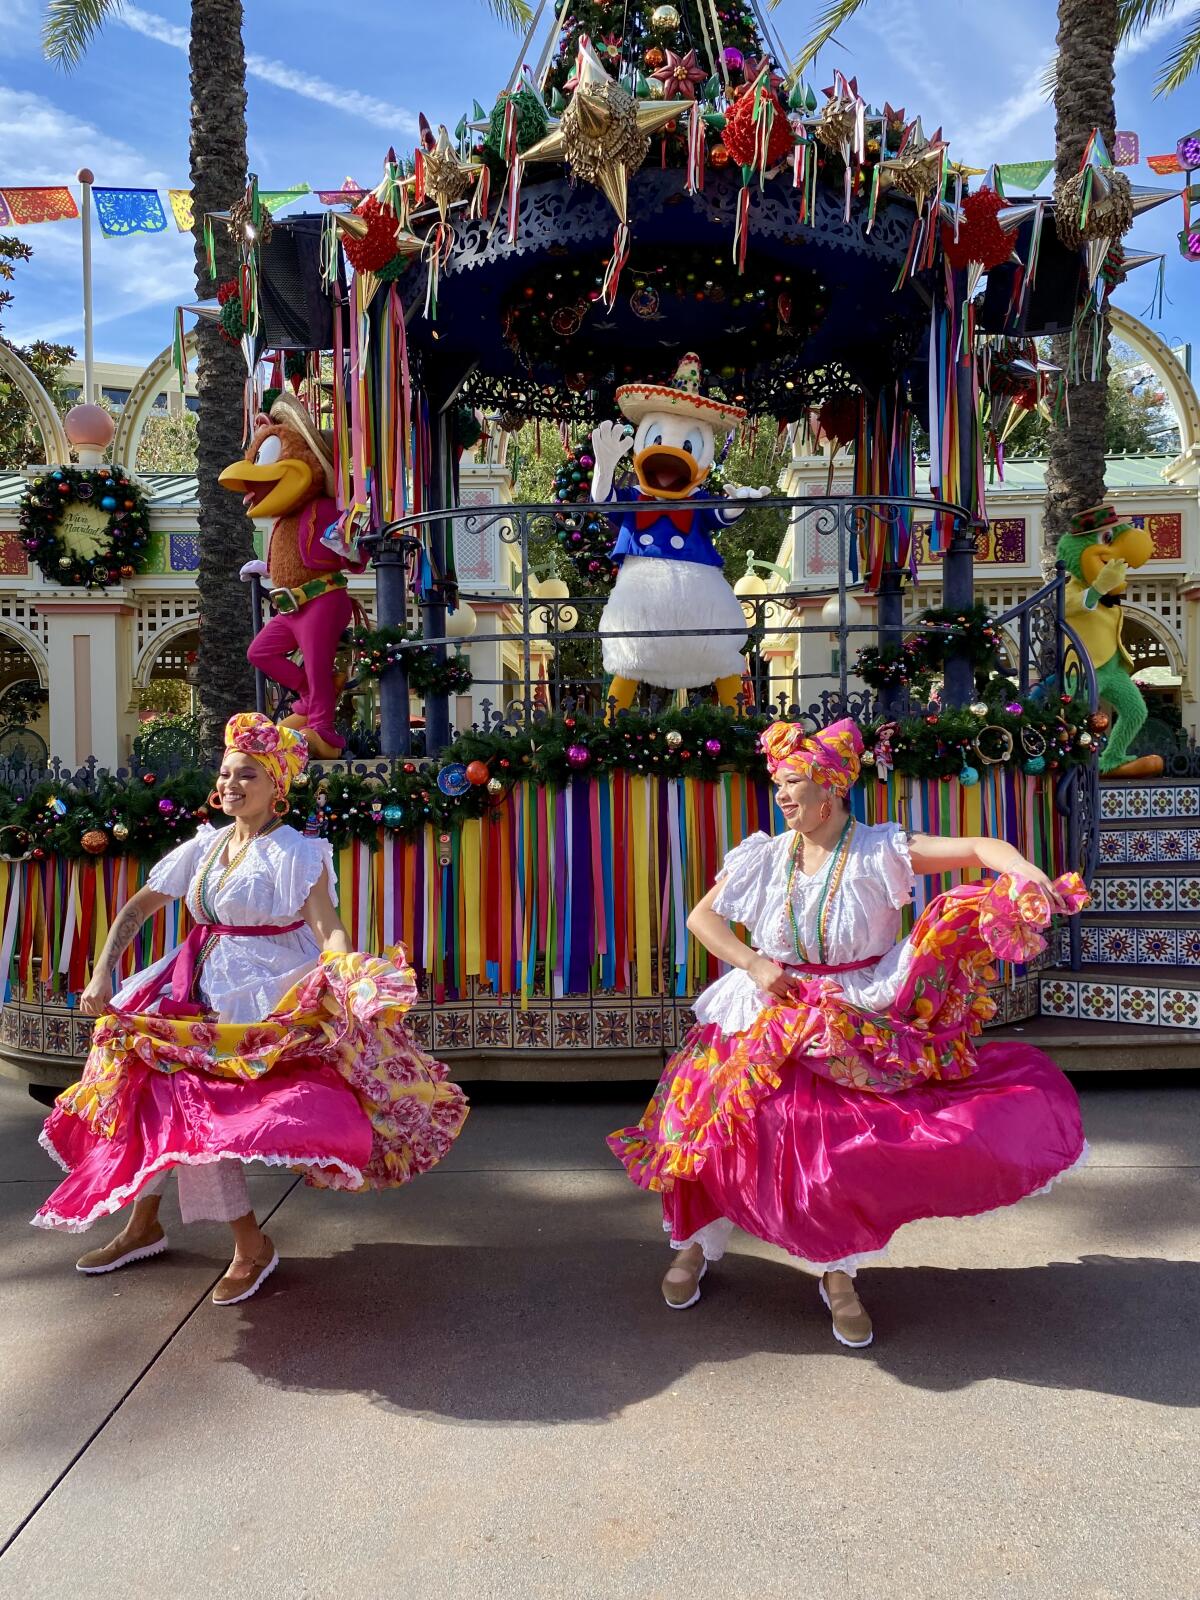 “Disney ¡Viva Navidad!” is hosted by the Three Caballeros and features Brazilian samba dancers and percussionists.